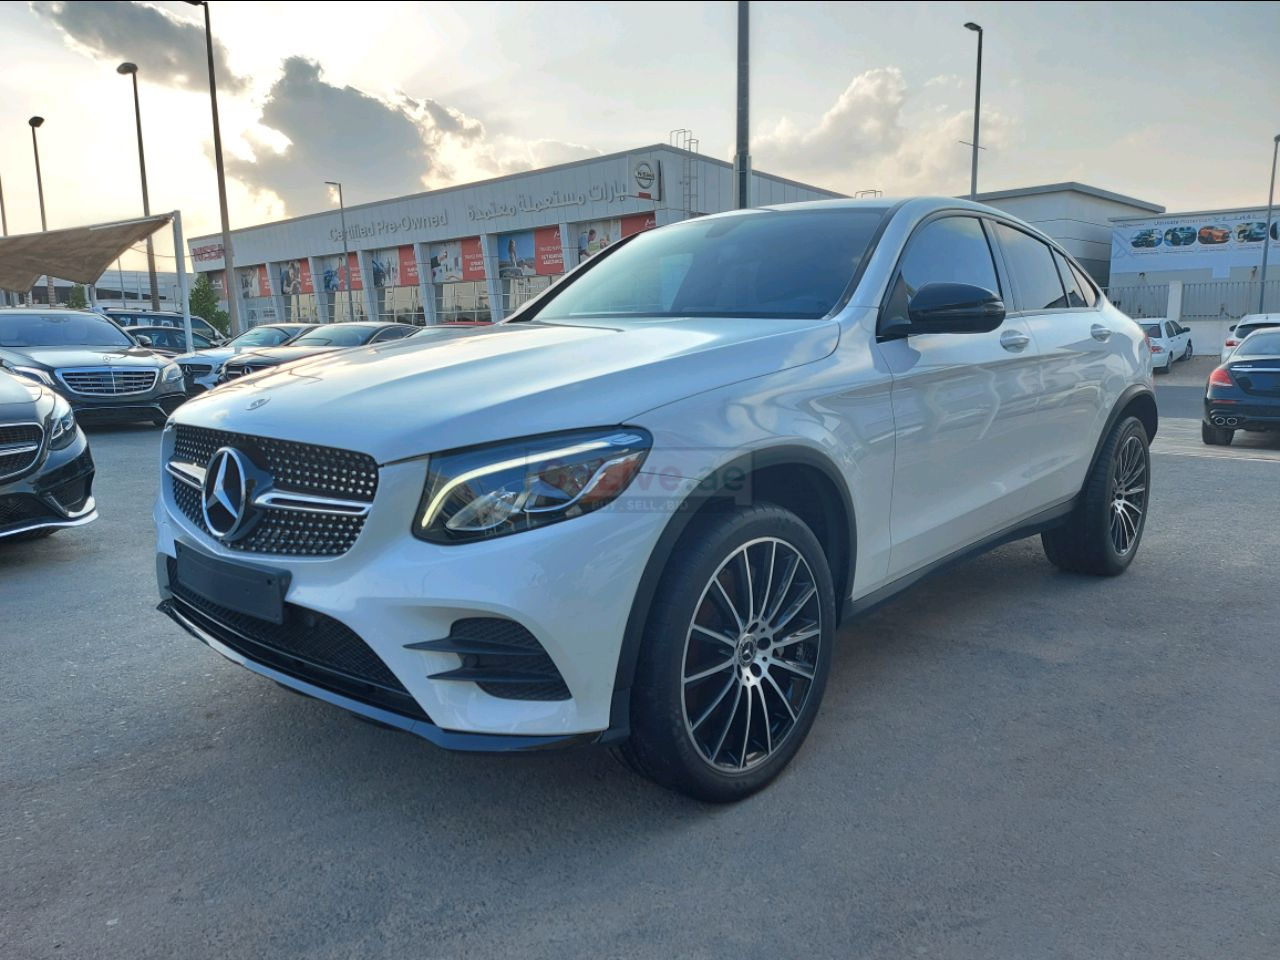 Mercedes Benz GLC 2017 AED 155,000, Warranty, Full Option, Turbo, Sunroof, Navigation System, Negotiable